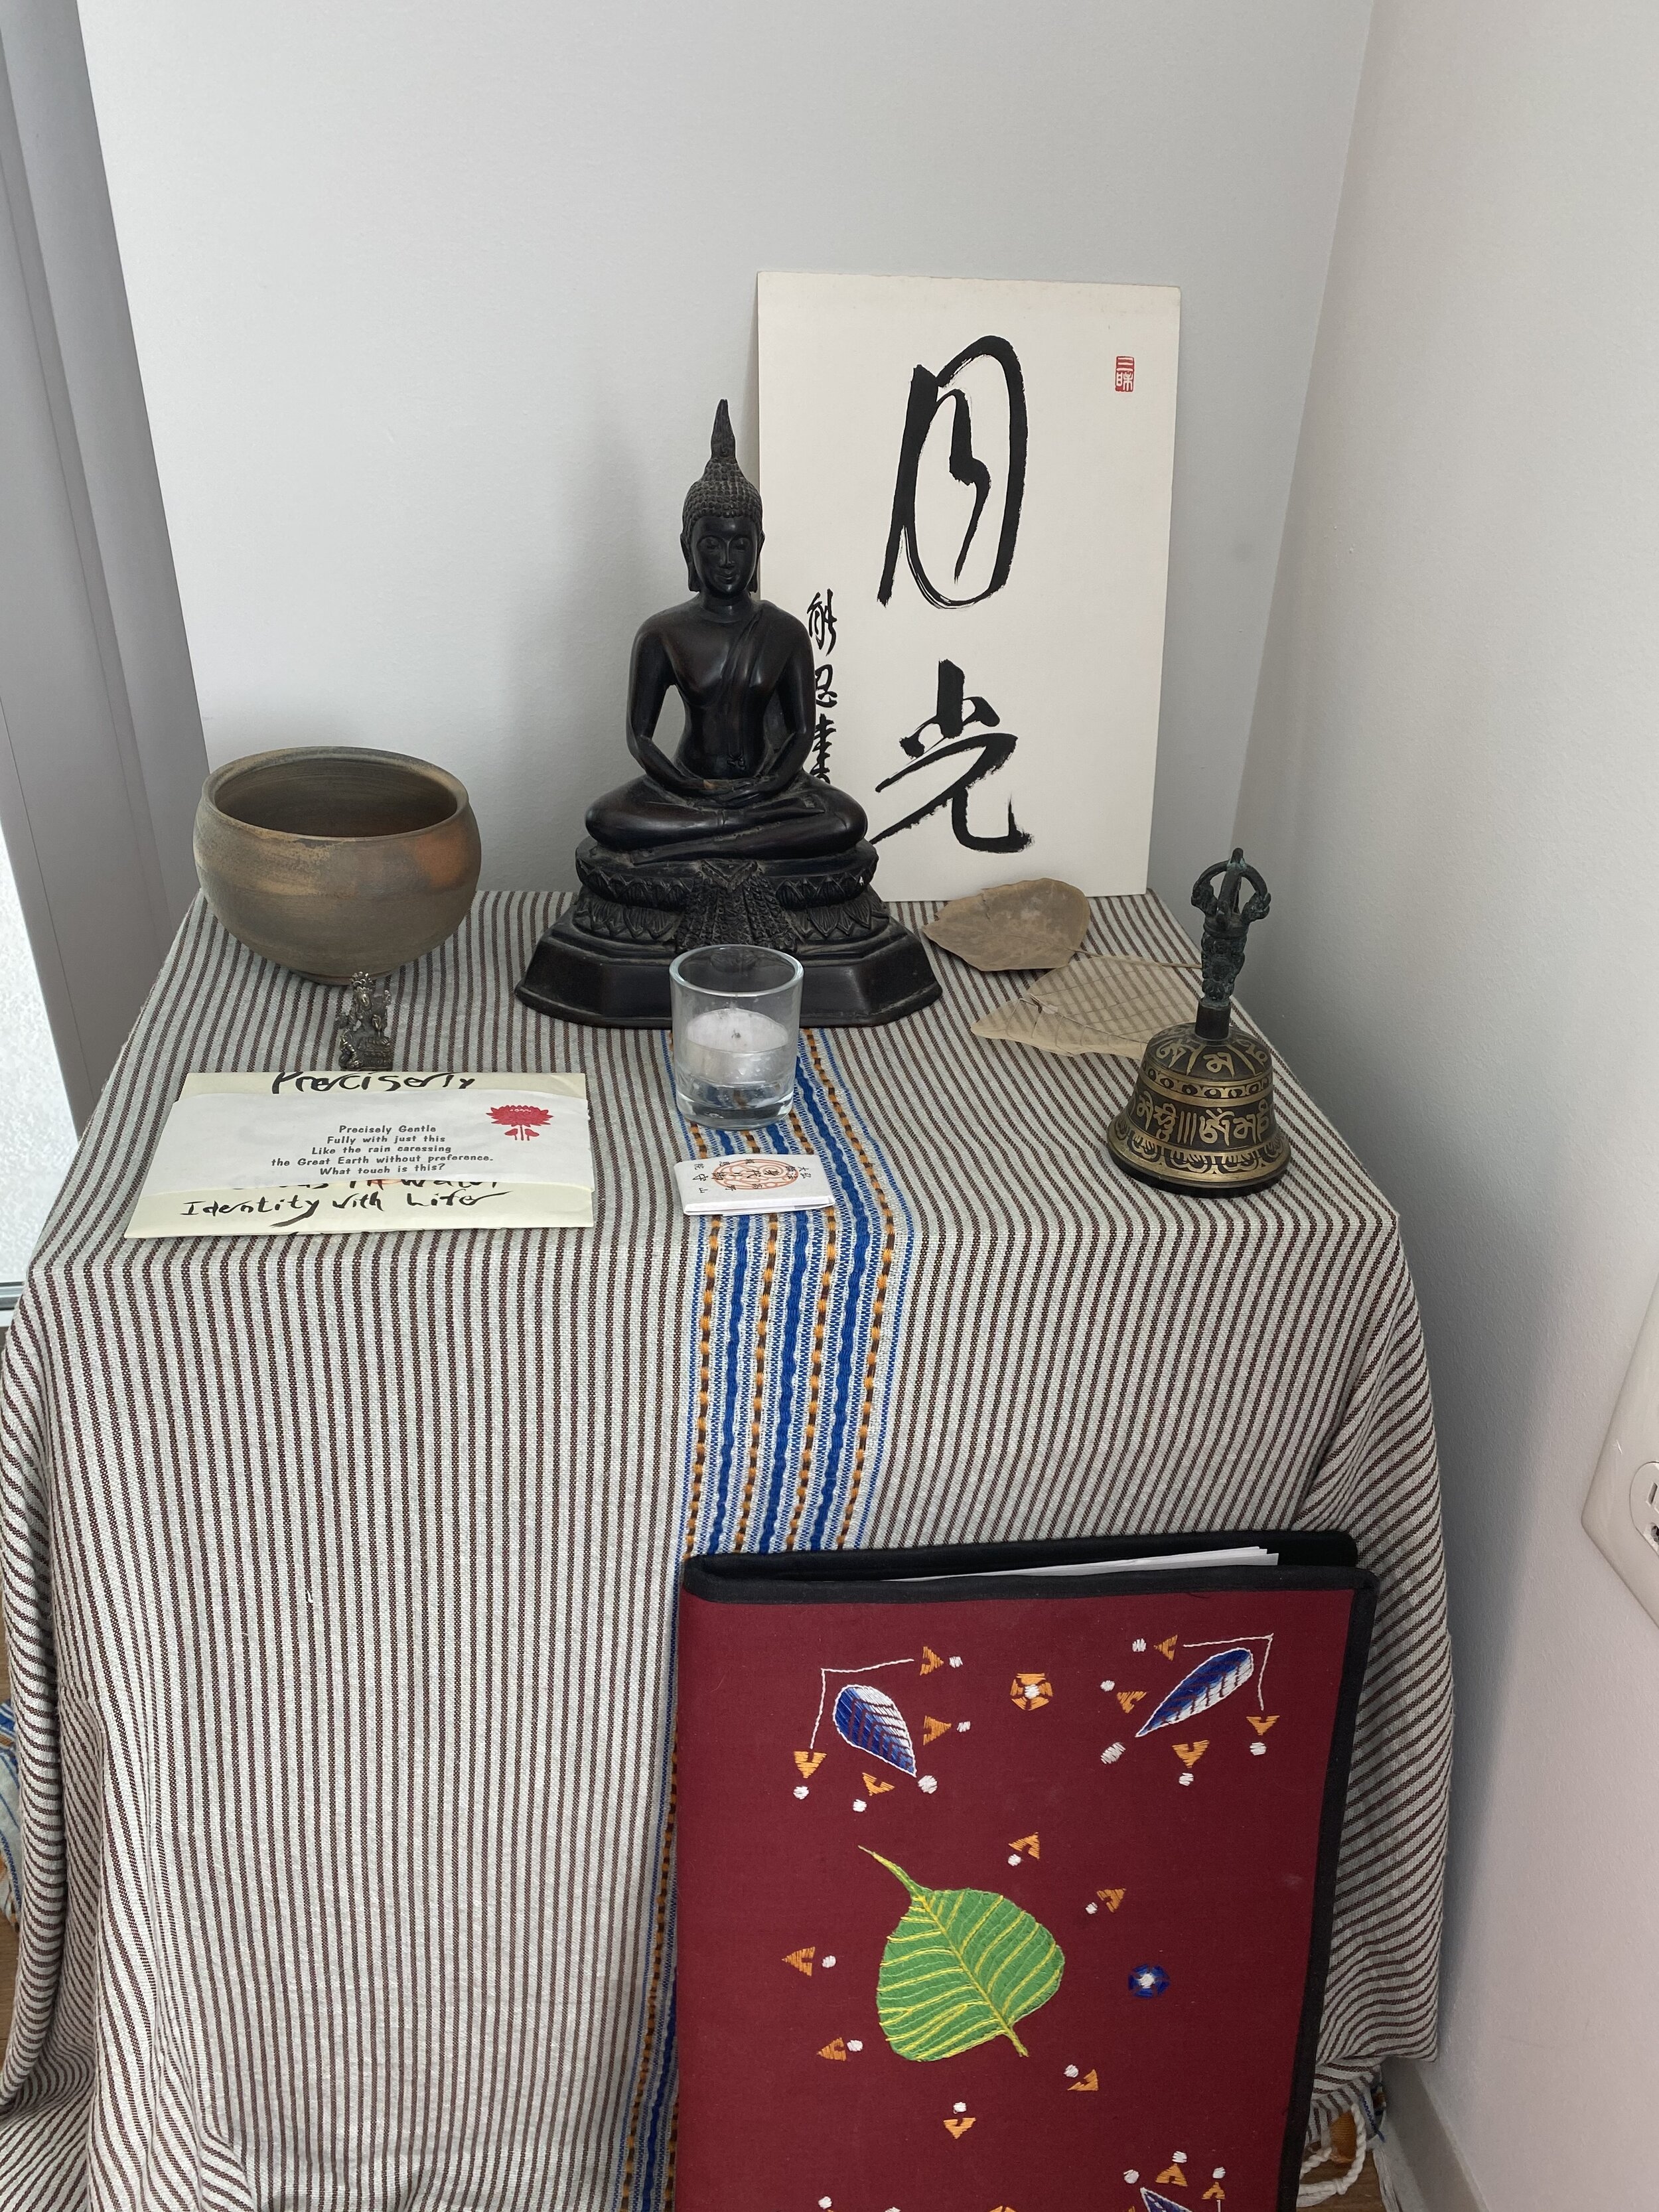 Reflections on a Home Altar — Just Show Up Zen Sangha